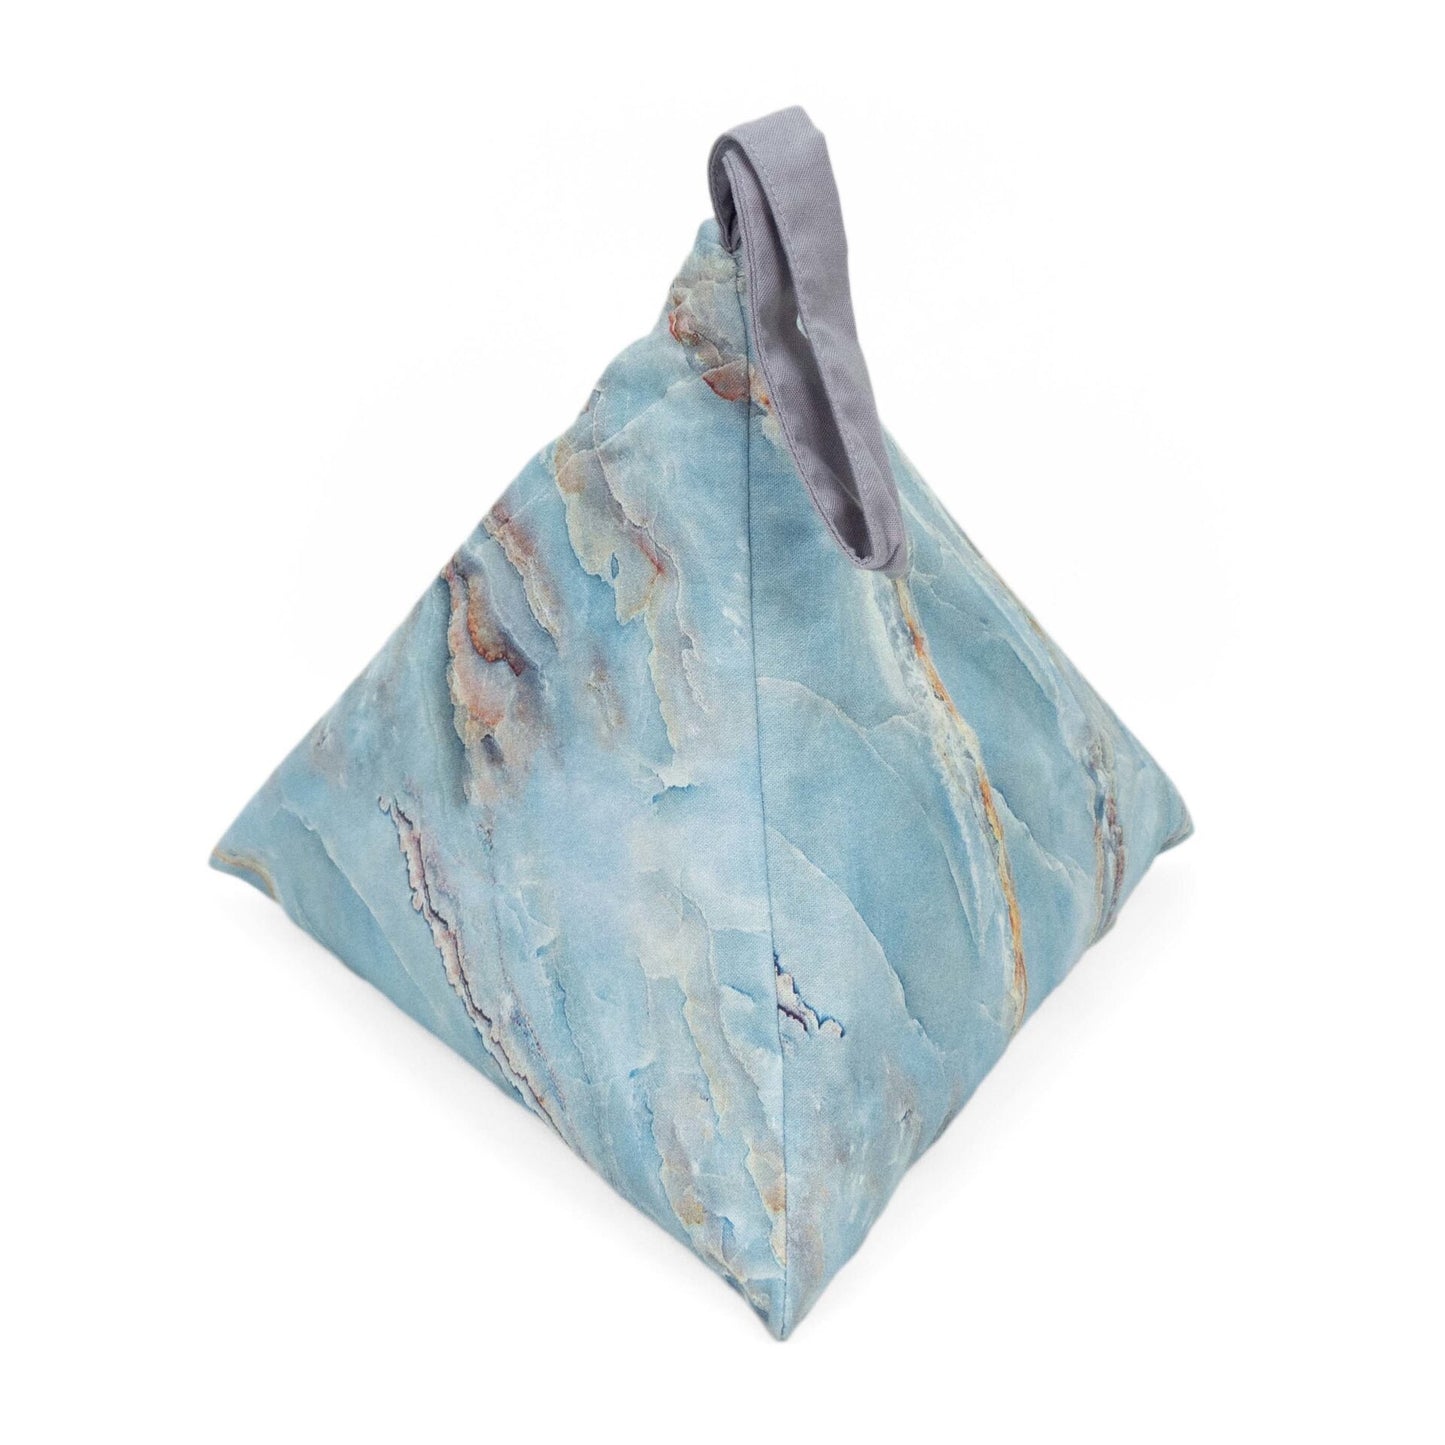 Manta Marble - Llexical Divided Sock Pouch - Knitting, Crochet, Spinning Project Bag